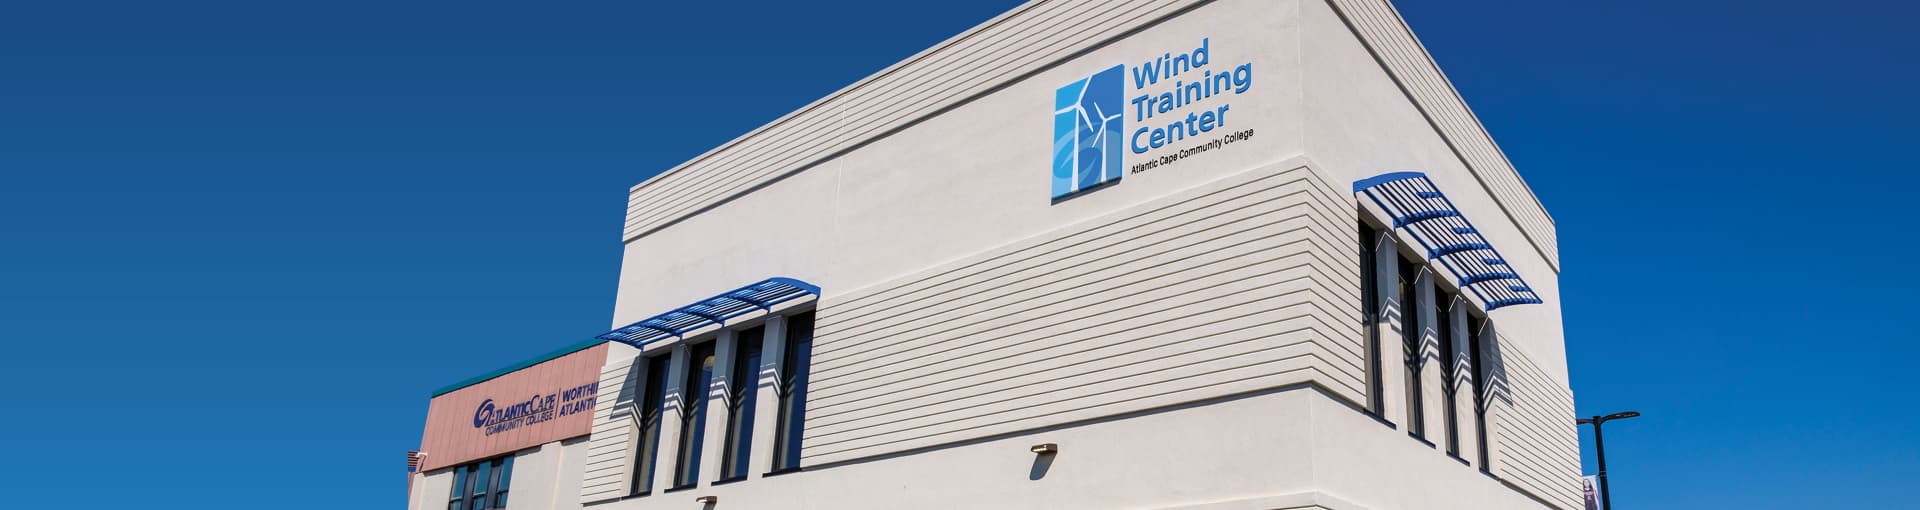 exterior photo of the wind center at the Atlantic City campus